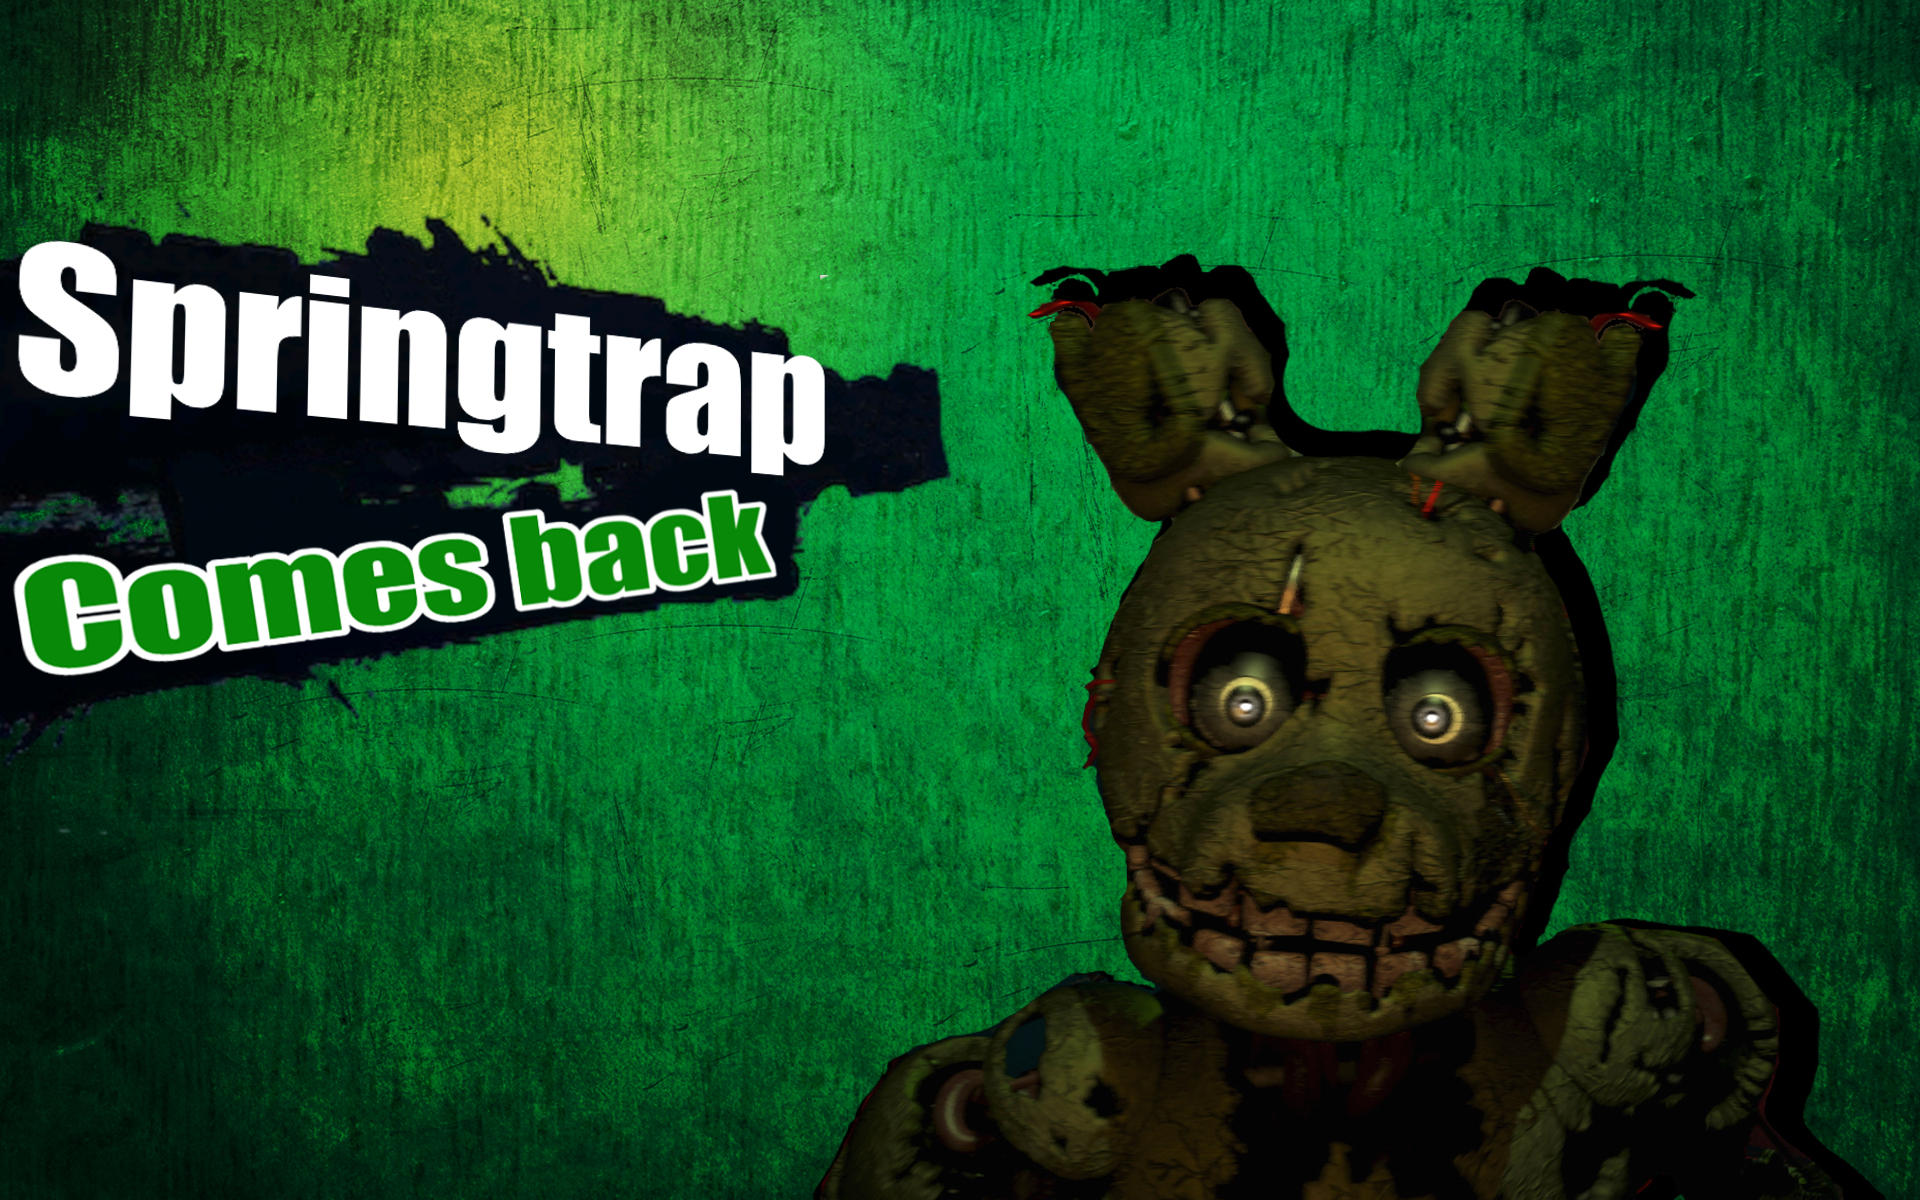 Springtran Comes Back Five Nights At Freddy S 3 Green - Five Nights At Freddy's 3 - HD Wallpaper 